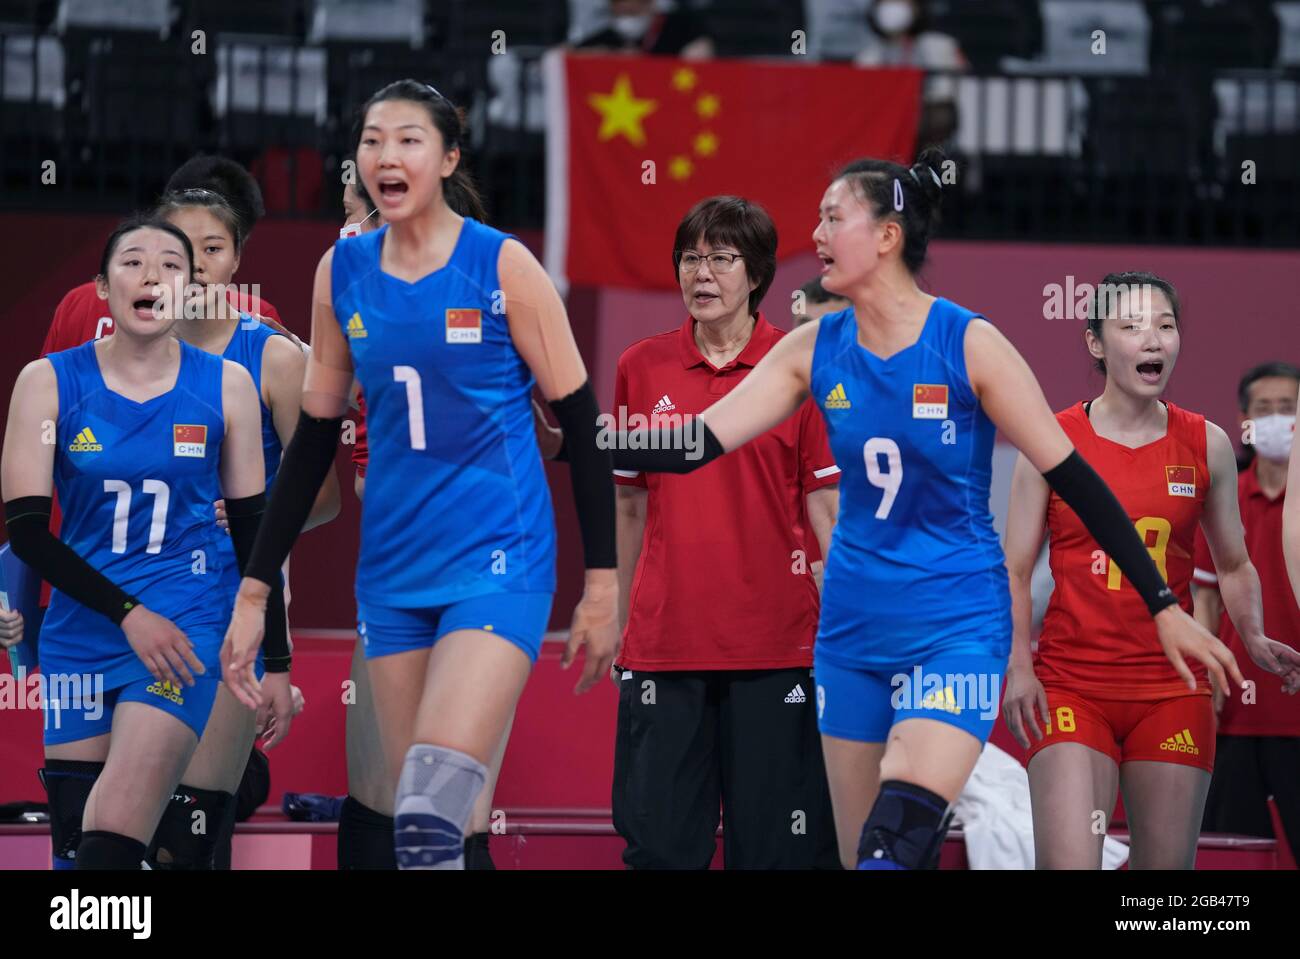 (210802) -- TOKYO, Aug. 2, 2021 (Xinhua) -- Lang Ping (3rd R), head coach of China, reacts during the women's volleyball preliminary match between China and Argentina at the Tokyo 2020 Olympic Games in Tokyo, Japan, Aug. 2, 2021. (Xinhua/Li Ga) Stock Photo